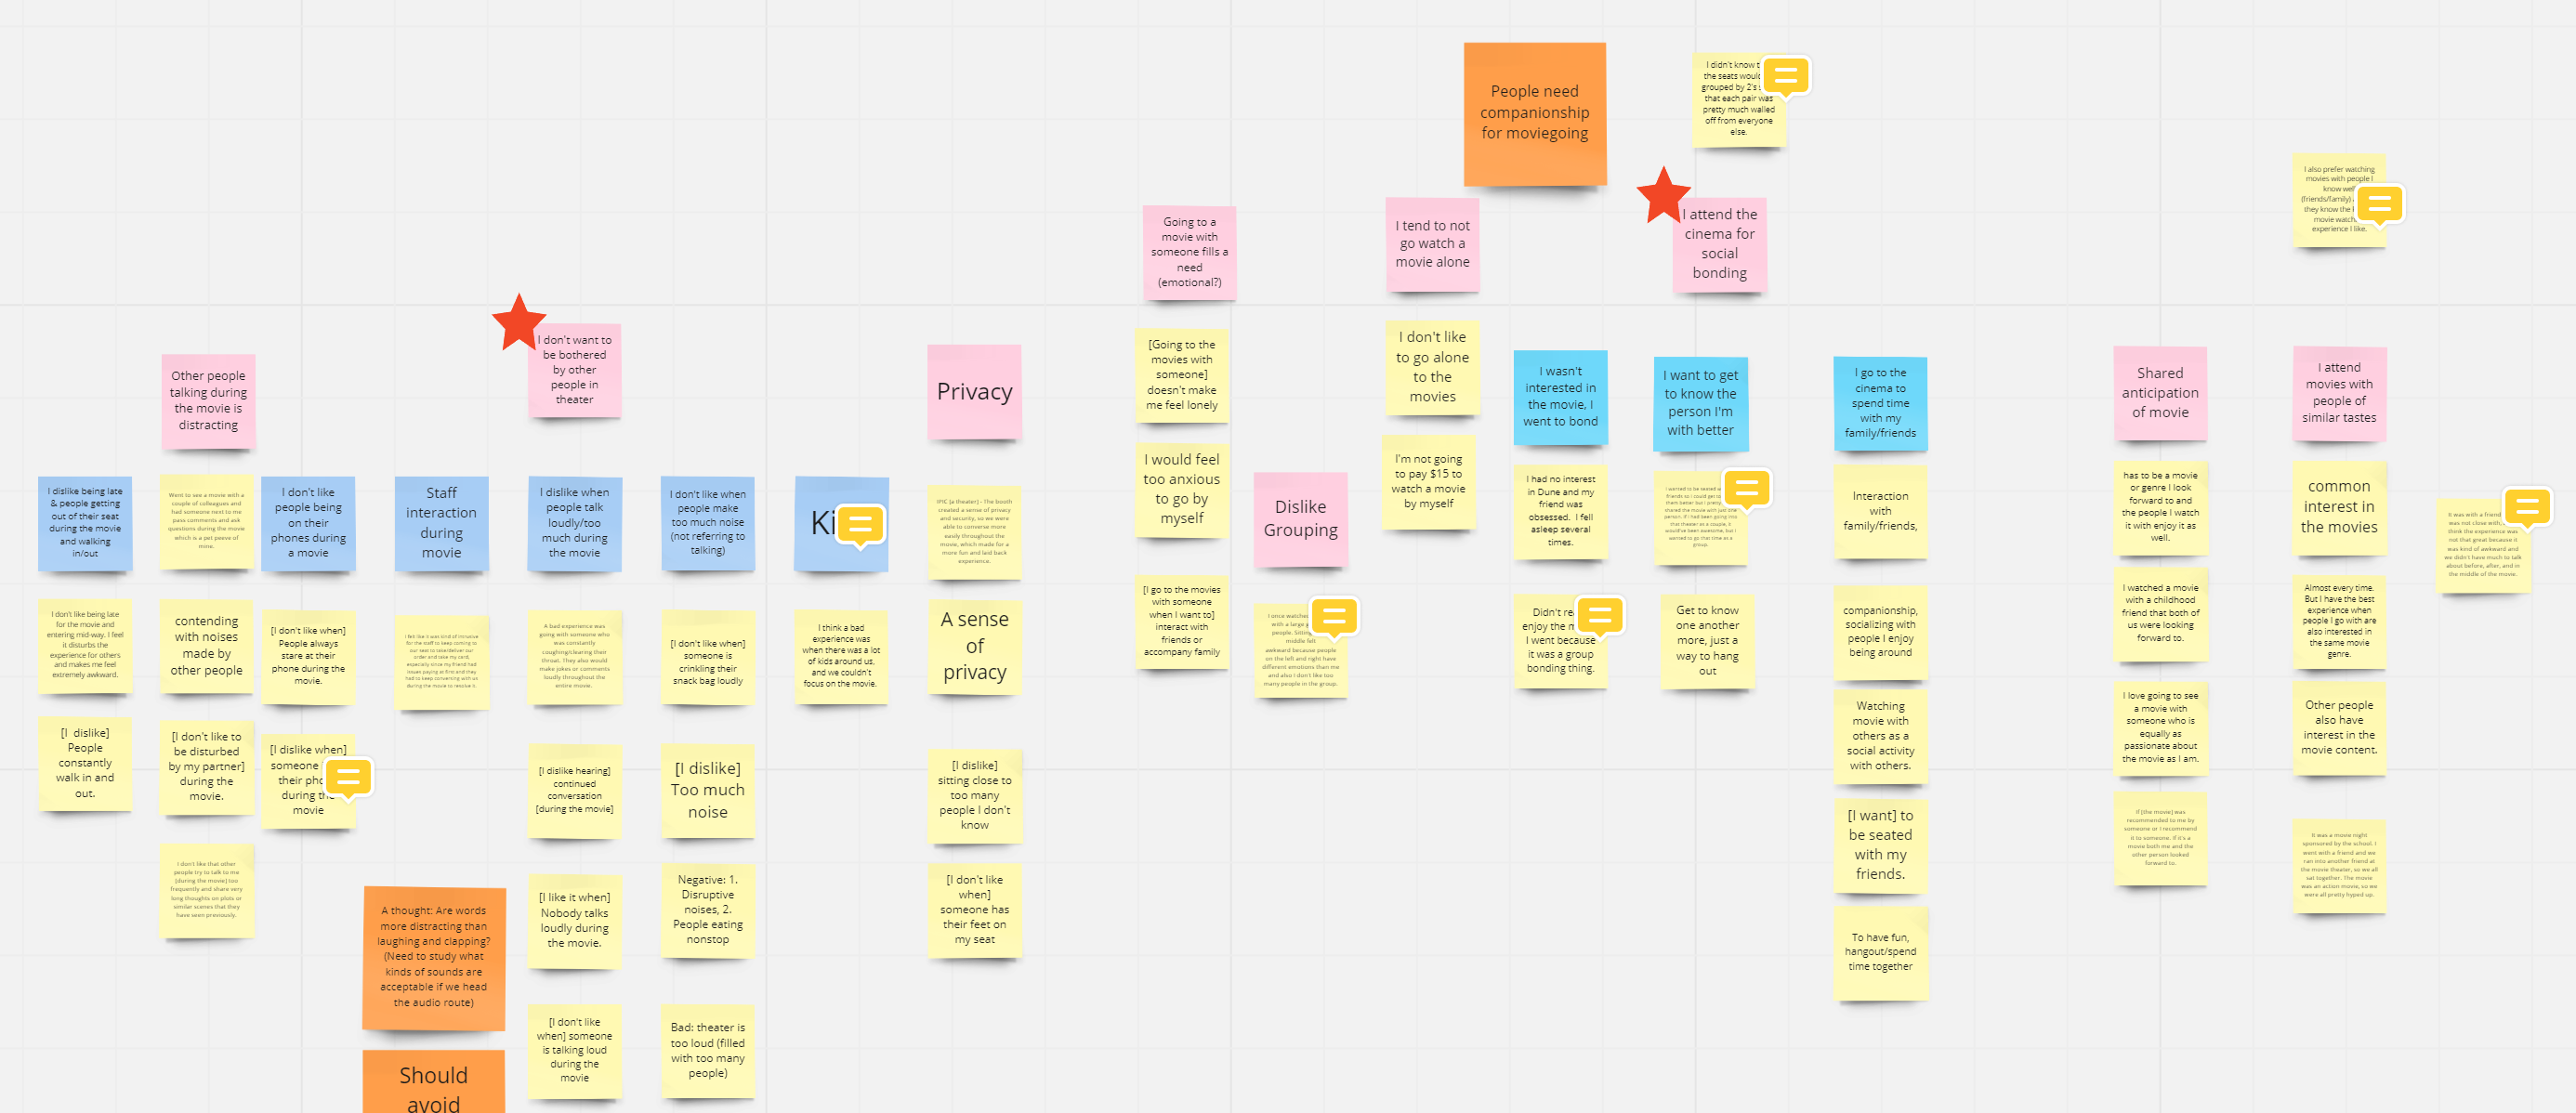 Section of the affinity map that was created to organize the comments from the exploratory survey and parse insights.